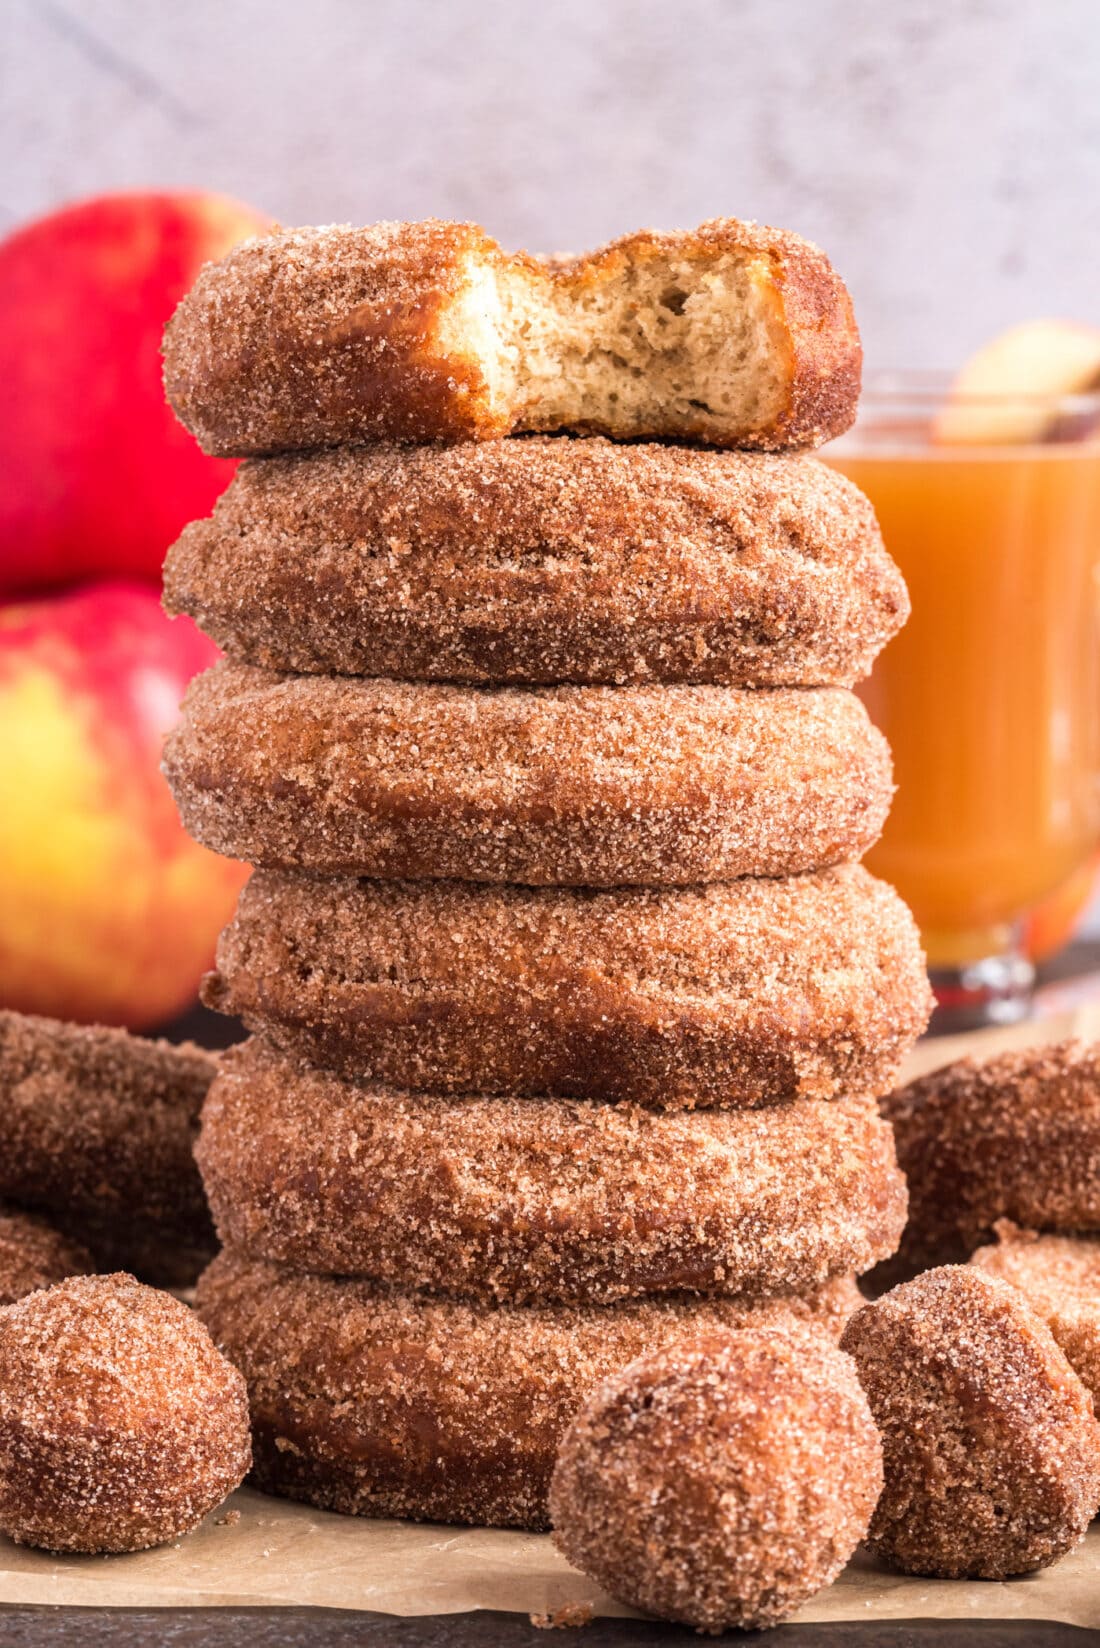 Stack of Apple Cider Doughnuts with a bit taken out of the top one